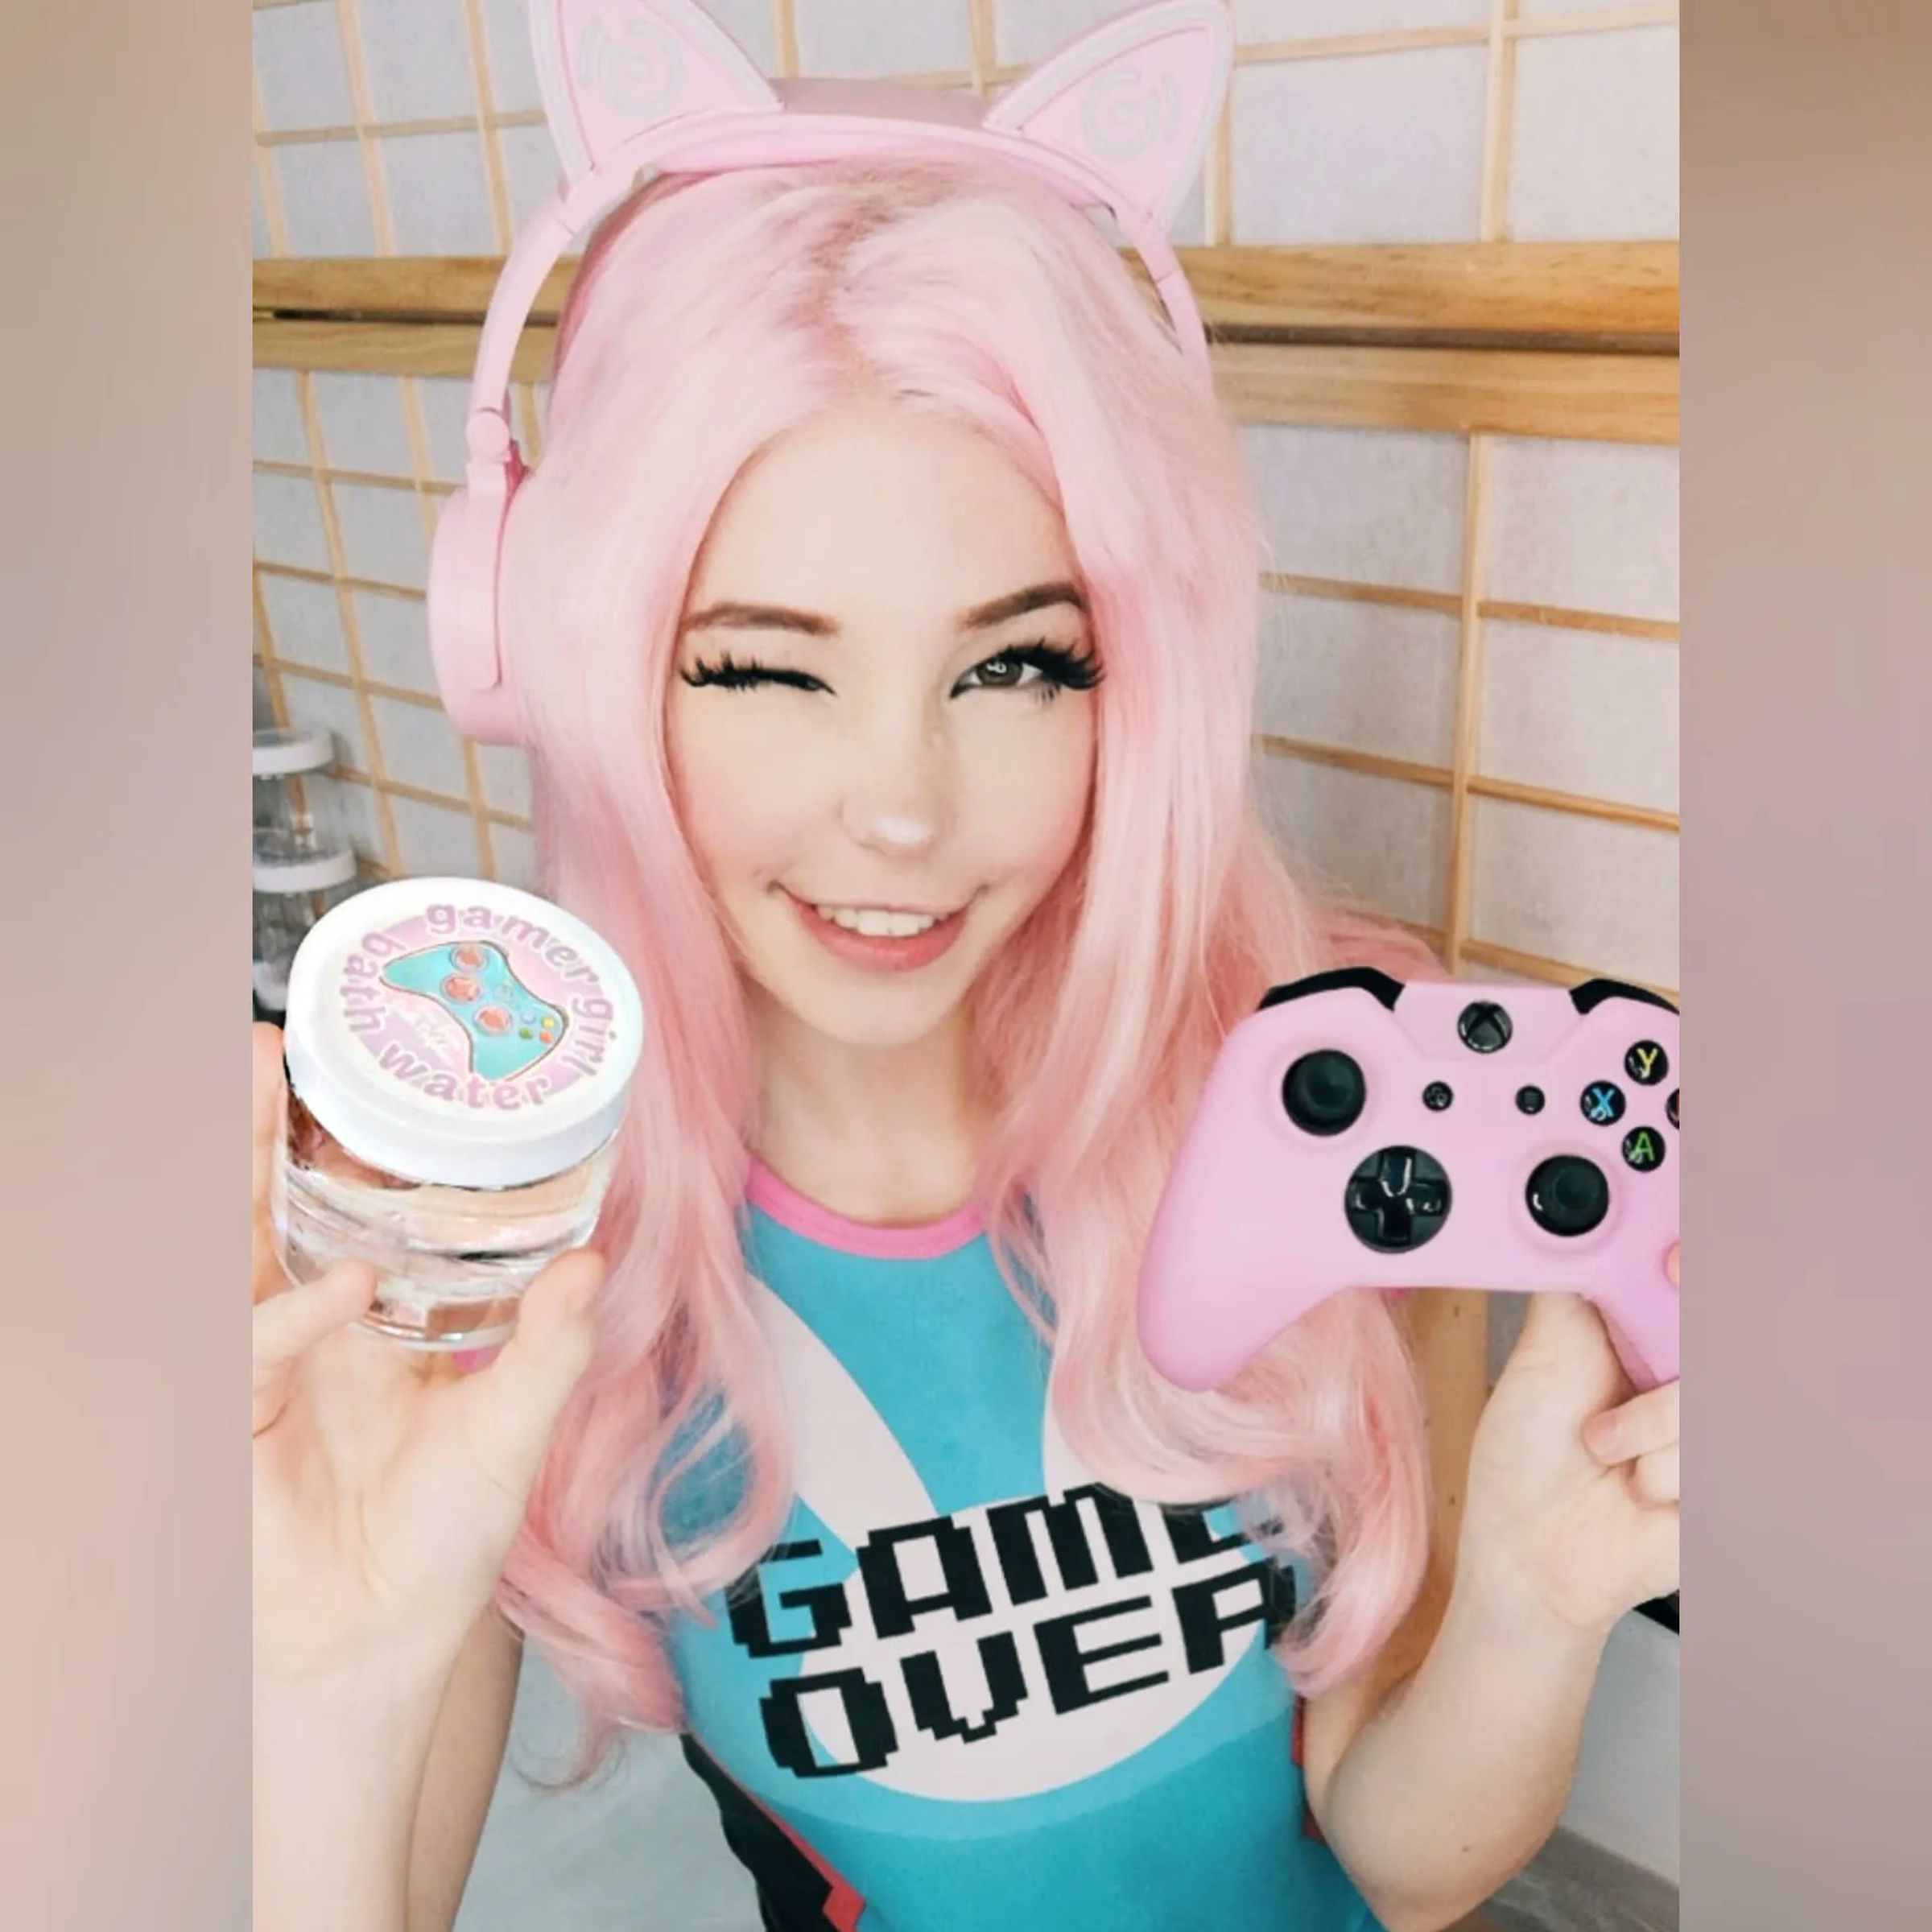 Photo of Belle Delphine, an adult content creator, sitting in a bathtub in a bathing suit holding up a controller and a jar of her bathwater.